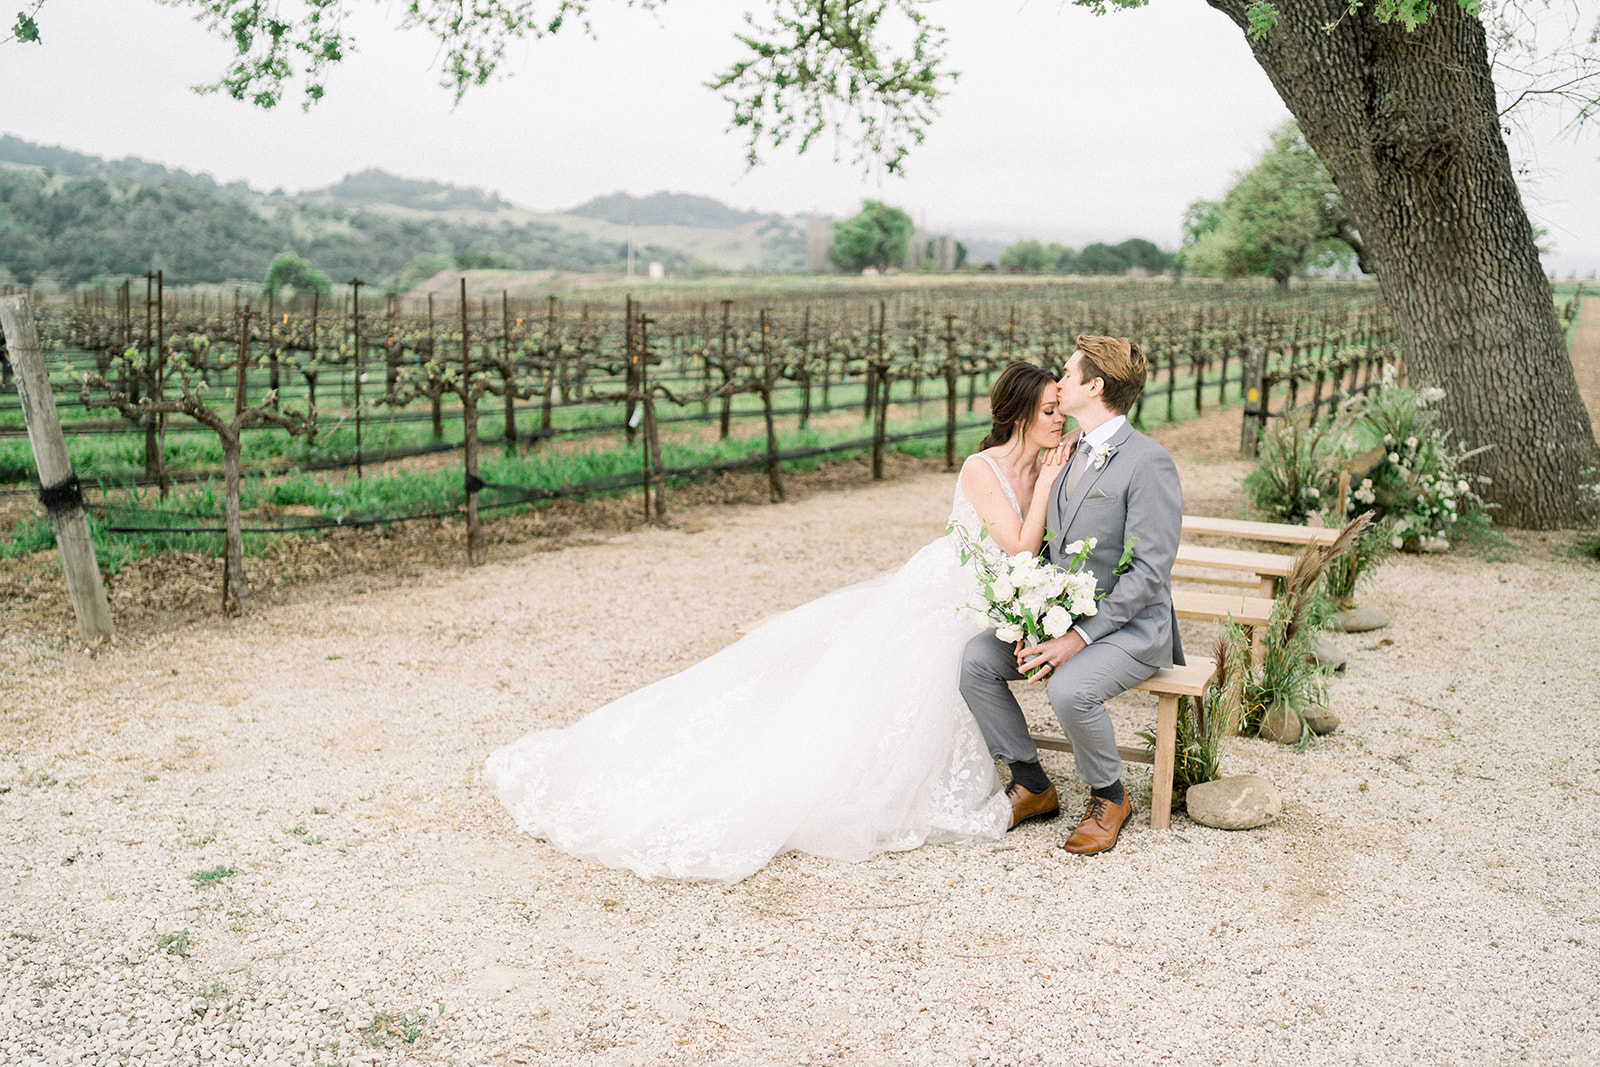 Luxurious Sunstone Winery wedding ceremony setup with with Southern California's oak trees framing the aisle.